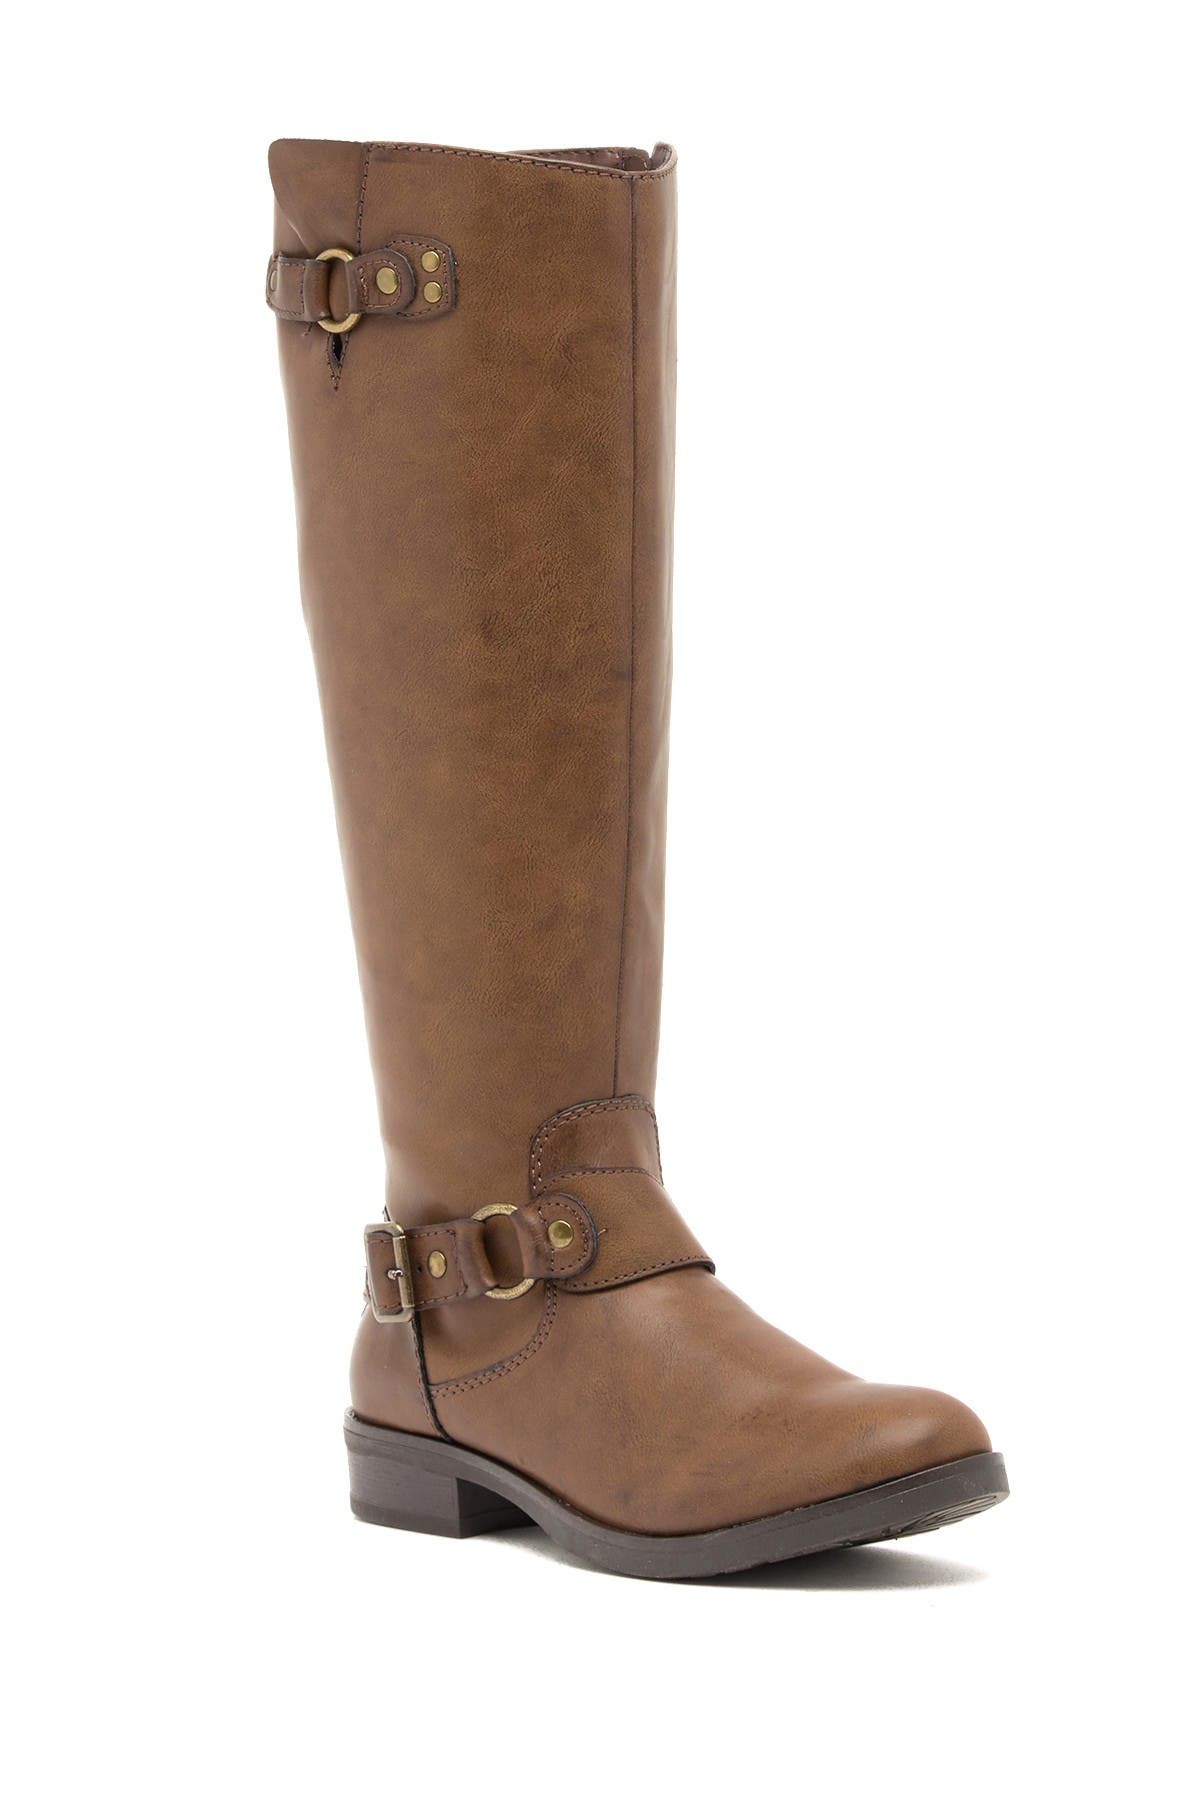 madden girl riding boots